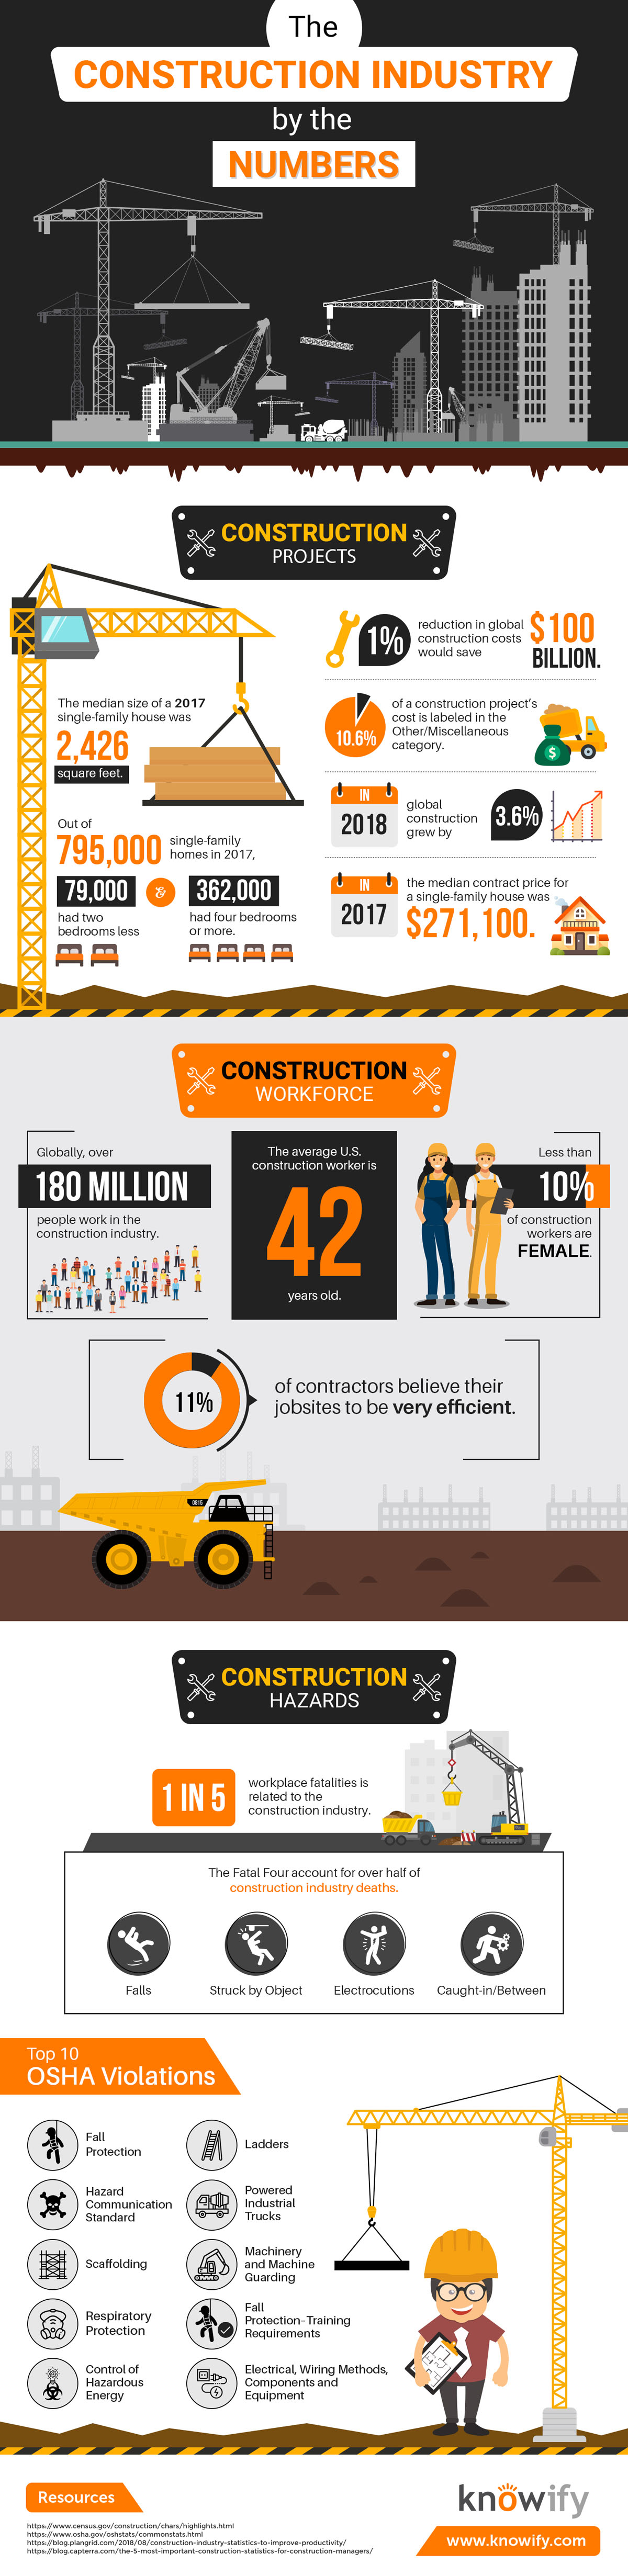 The Construction Industry by the Numbers